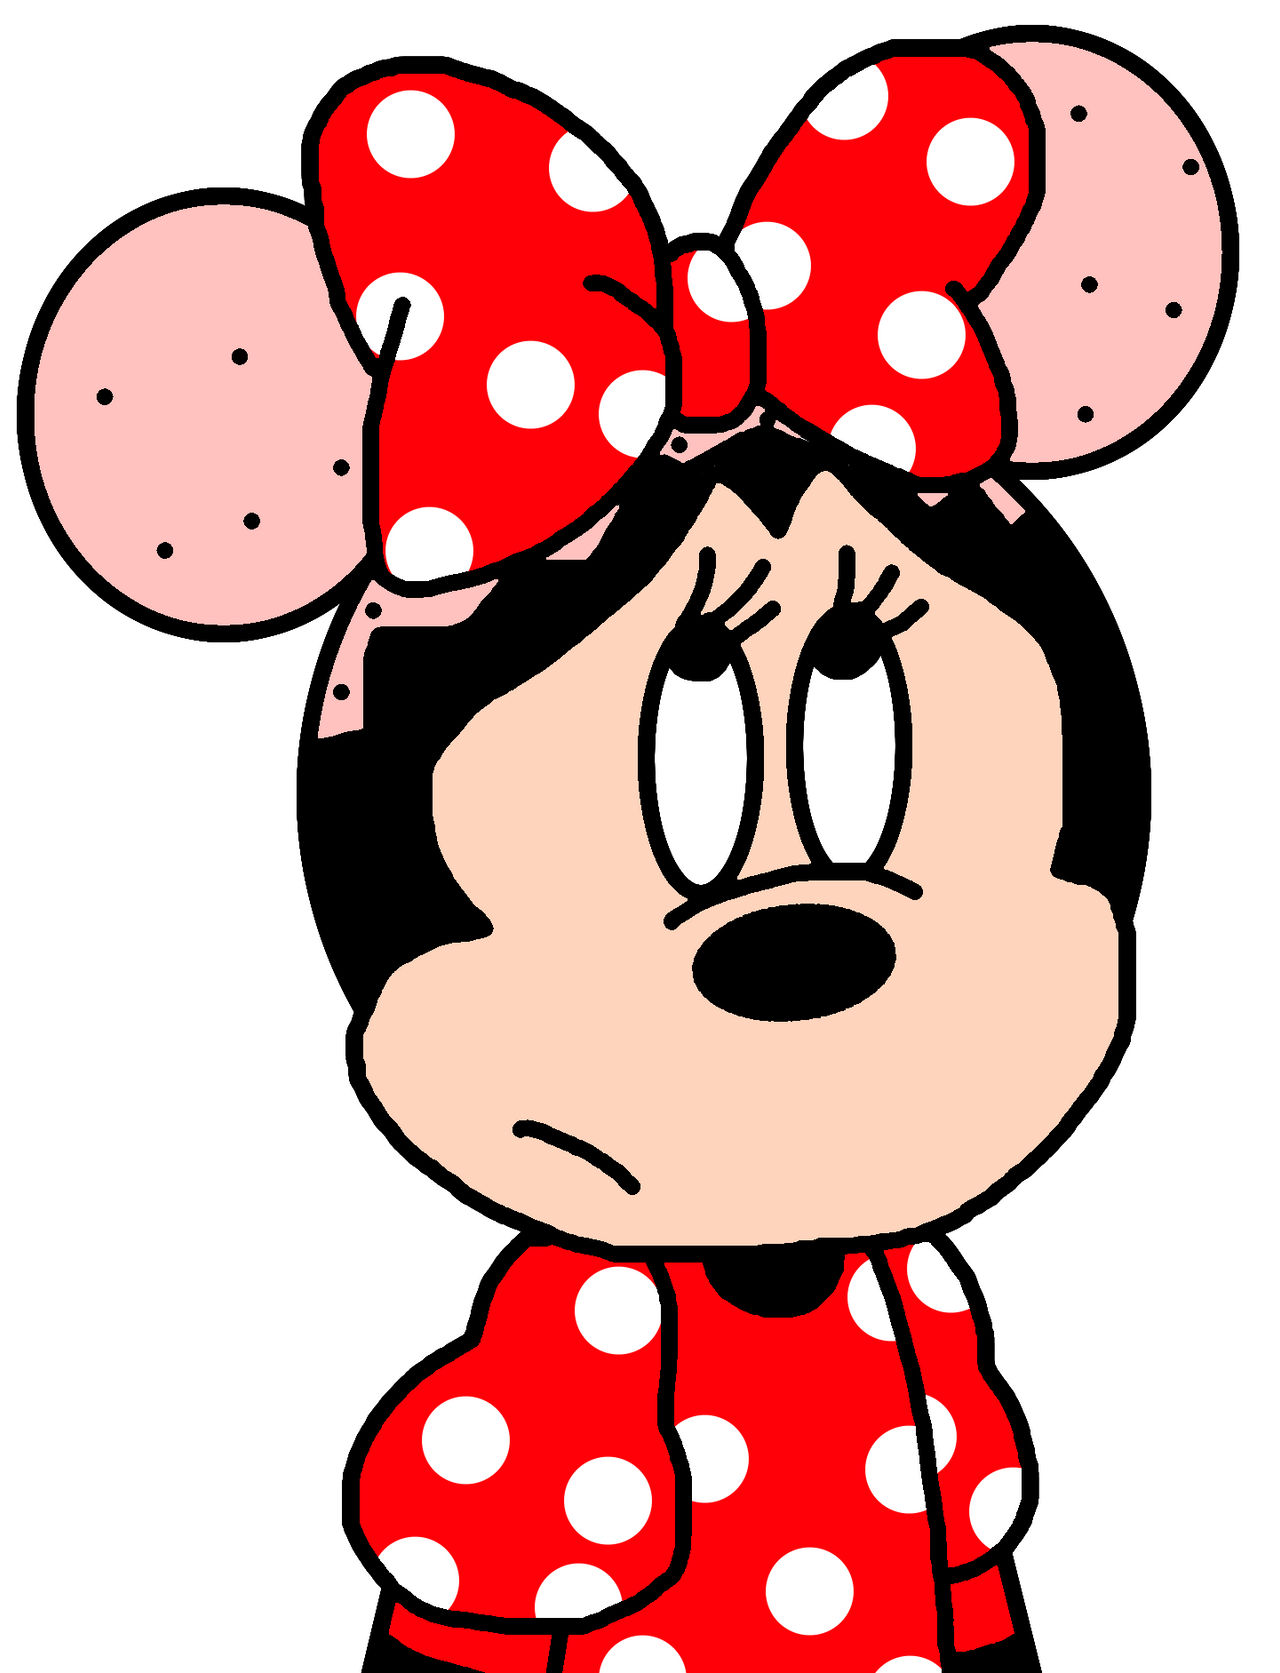 Minnie with half bad on top of head by Ultra-Shounen-Kai-Z on